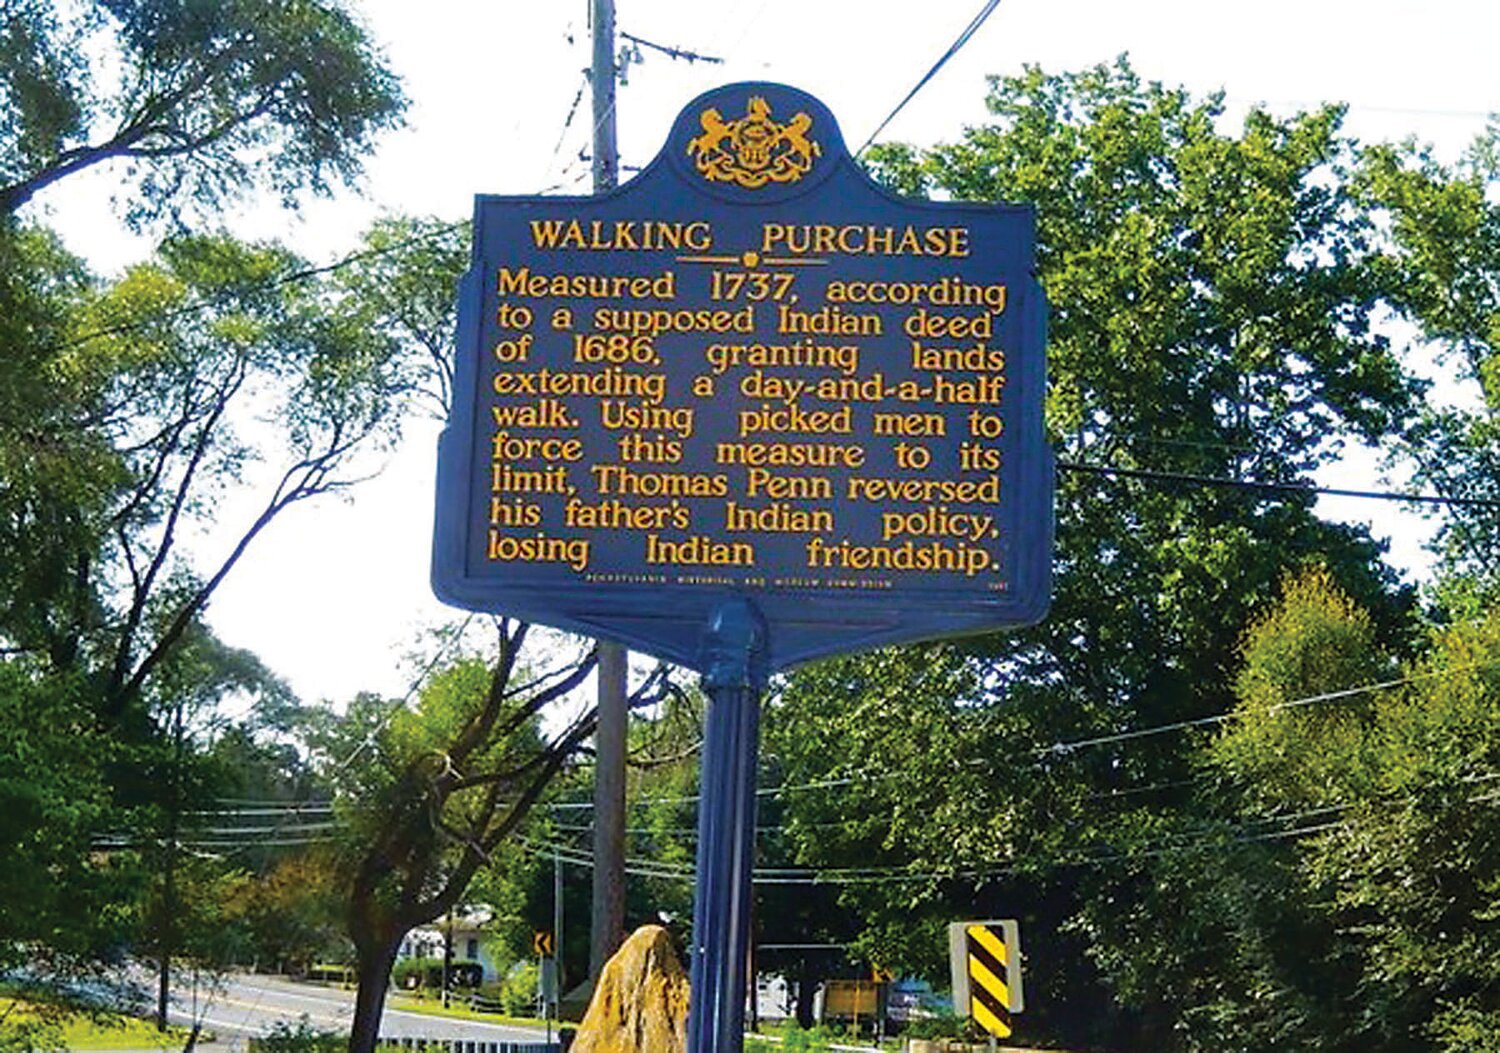 The Lenape in Pennsylvania never fully recovered from the Walking Purchase, through which the tribe lost 1.2 million acres of land to descendants of William Penn.